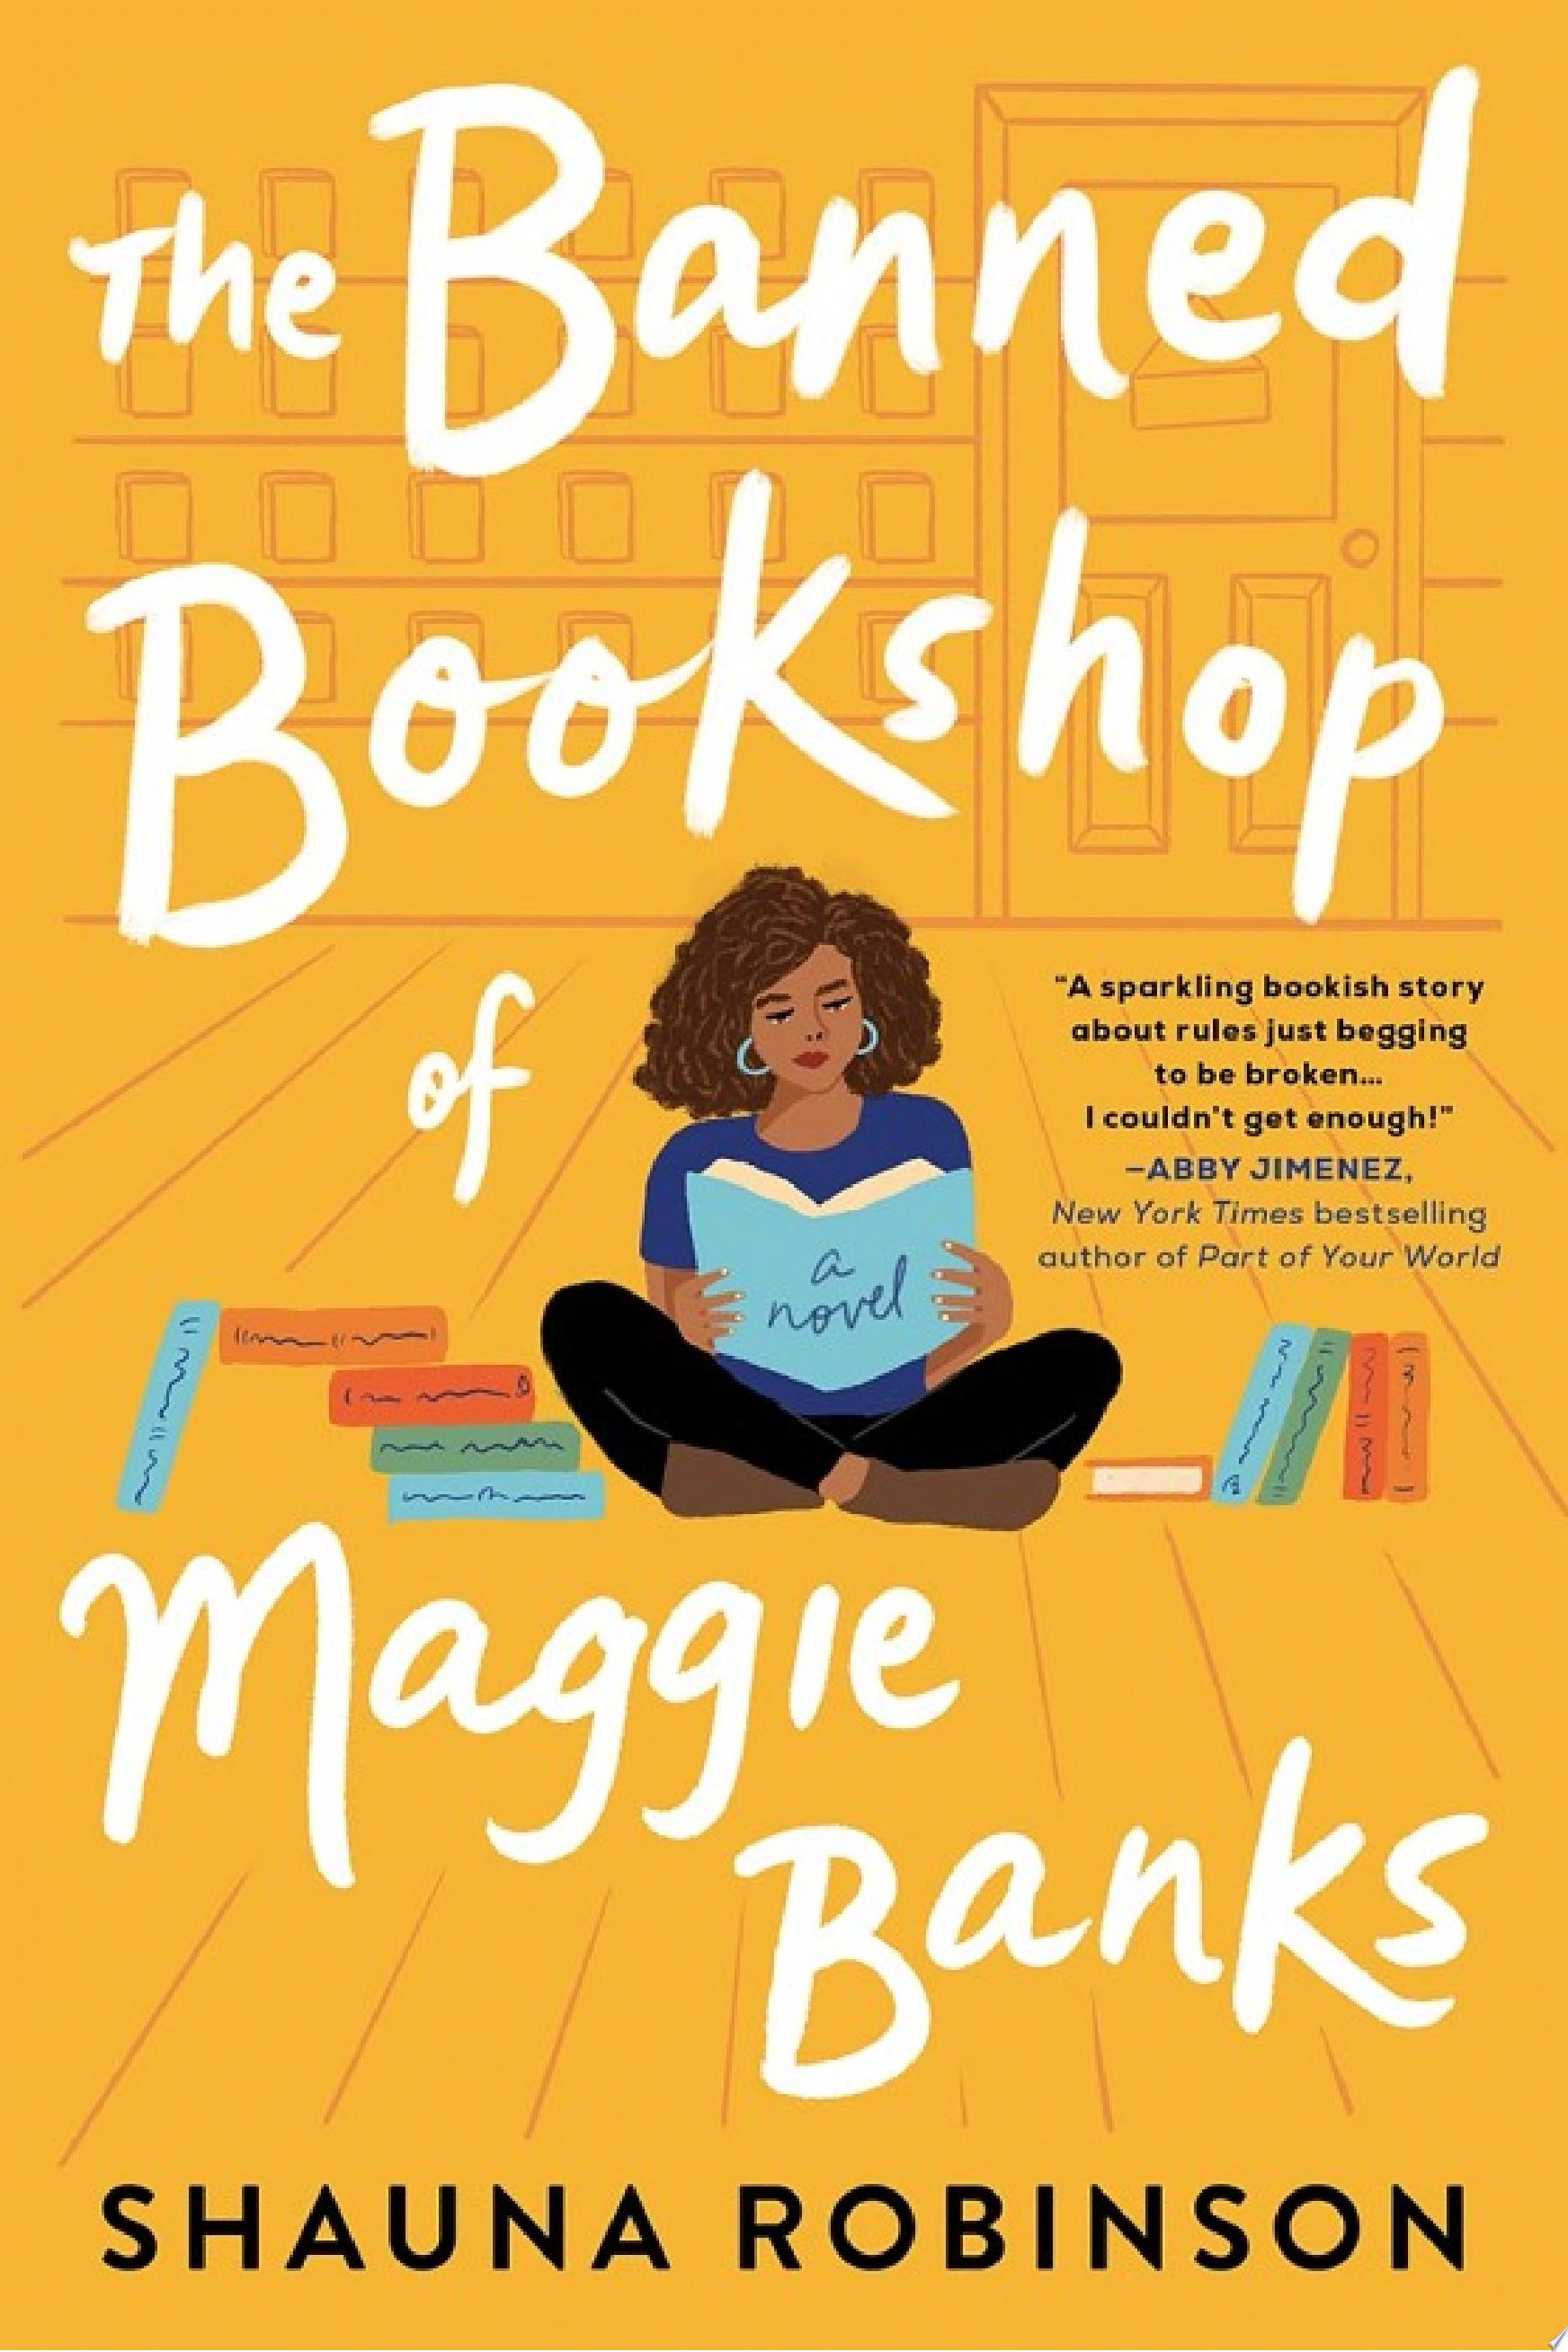 Image for "The Banned Bookshop of Maggie Banks"